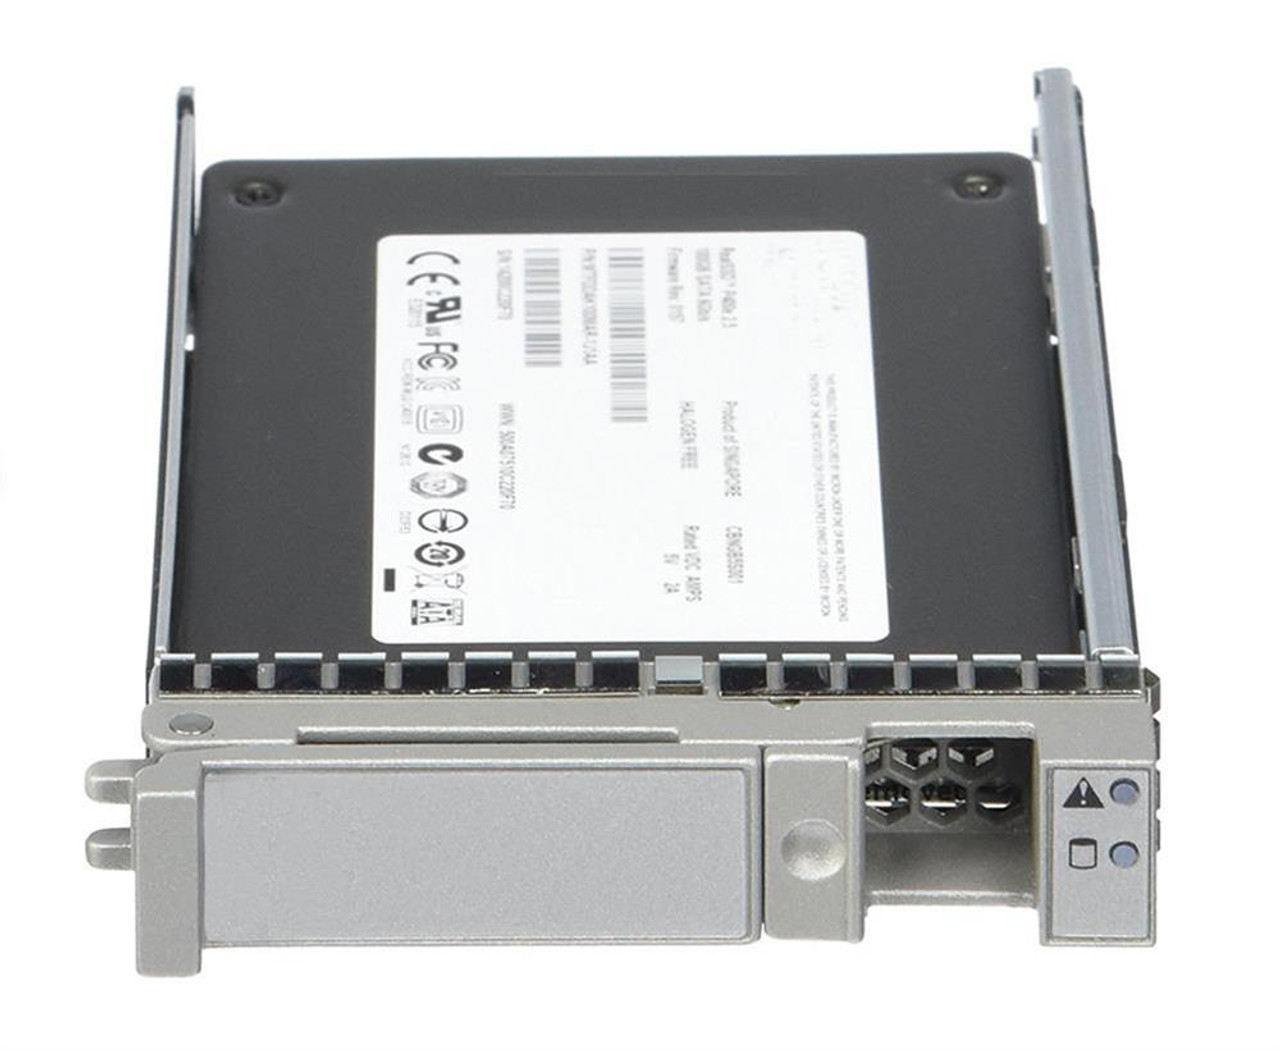 Cisco 3.2TB SAS 12Gbps Enterprise Performance 2.5-inch Internal Solid State Drive (SSD)